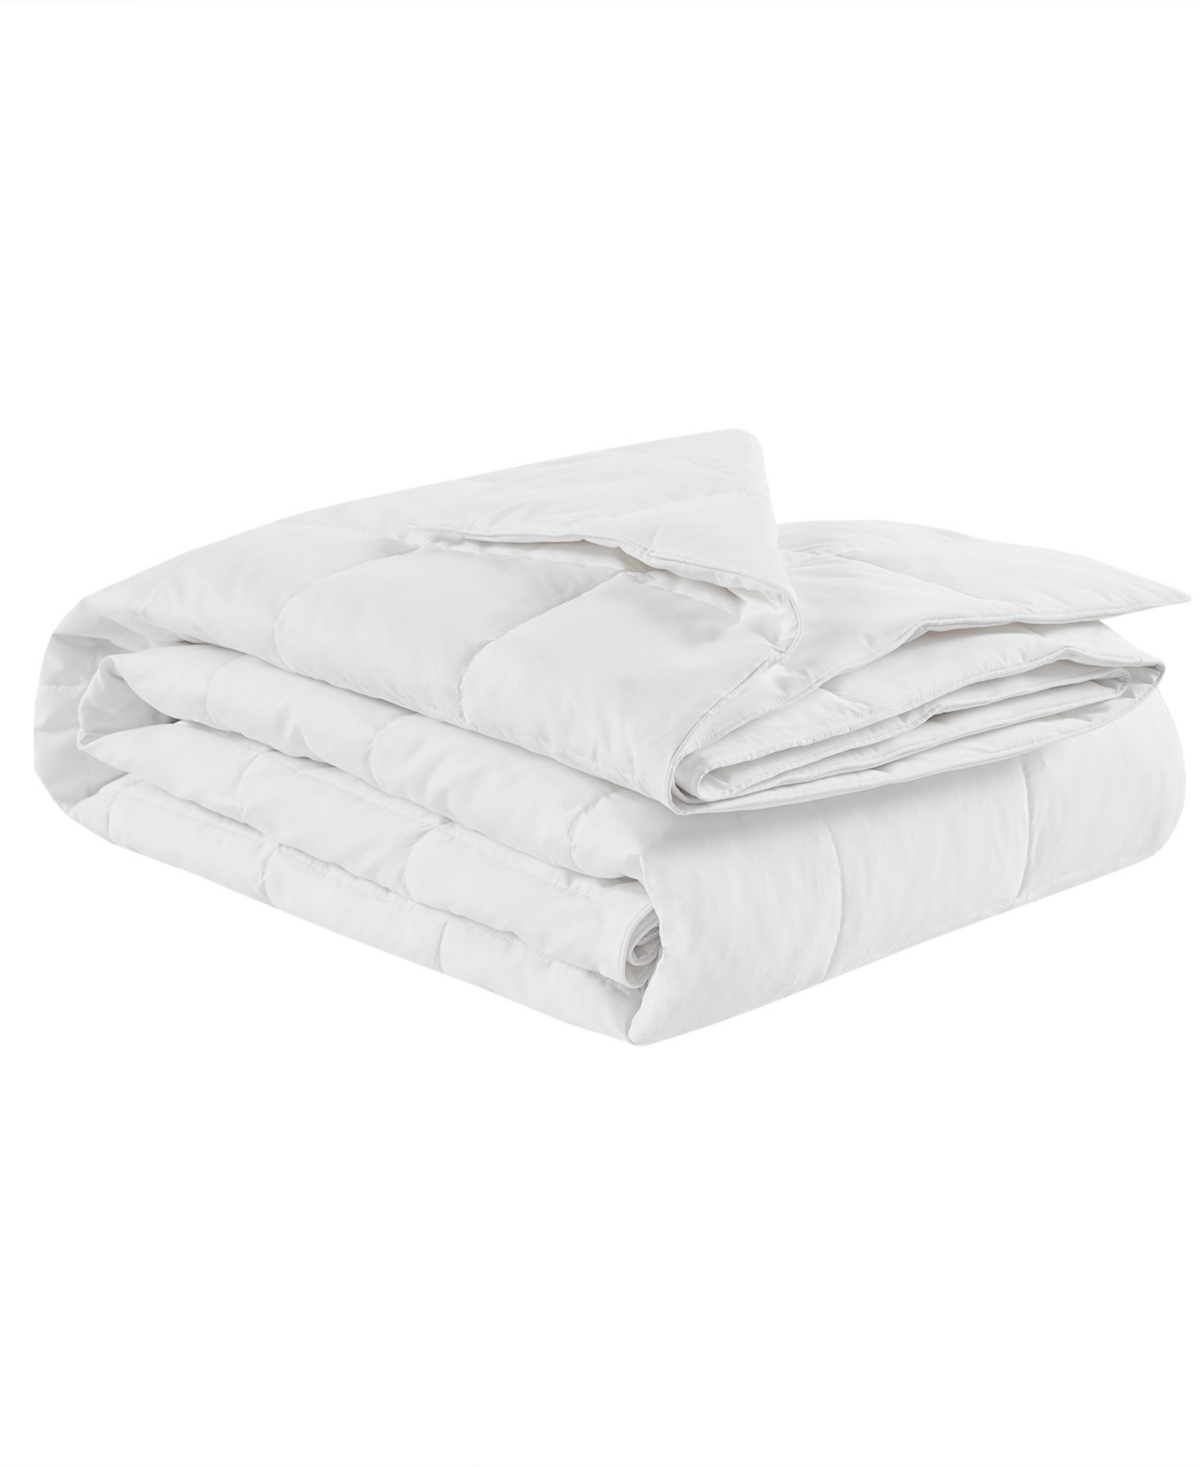 Sleep Philosophy Four Seasons Goose Feather & Good Down Filling Blanket, Full/queen Bedding In White